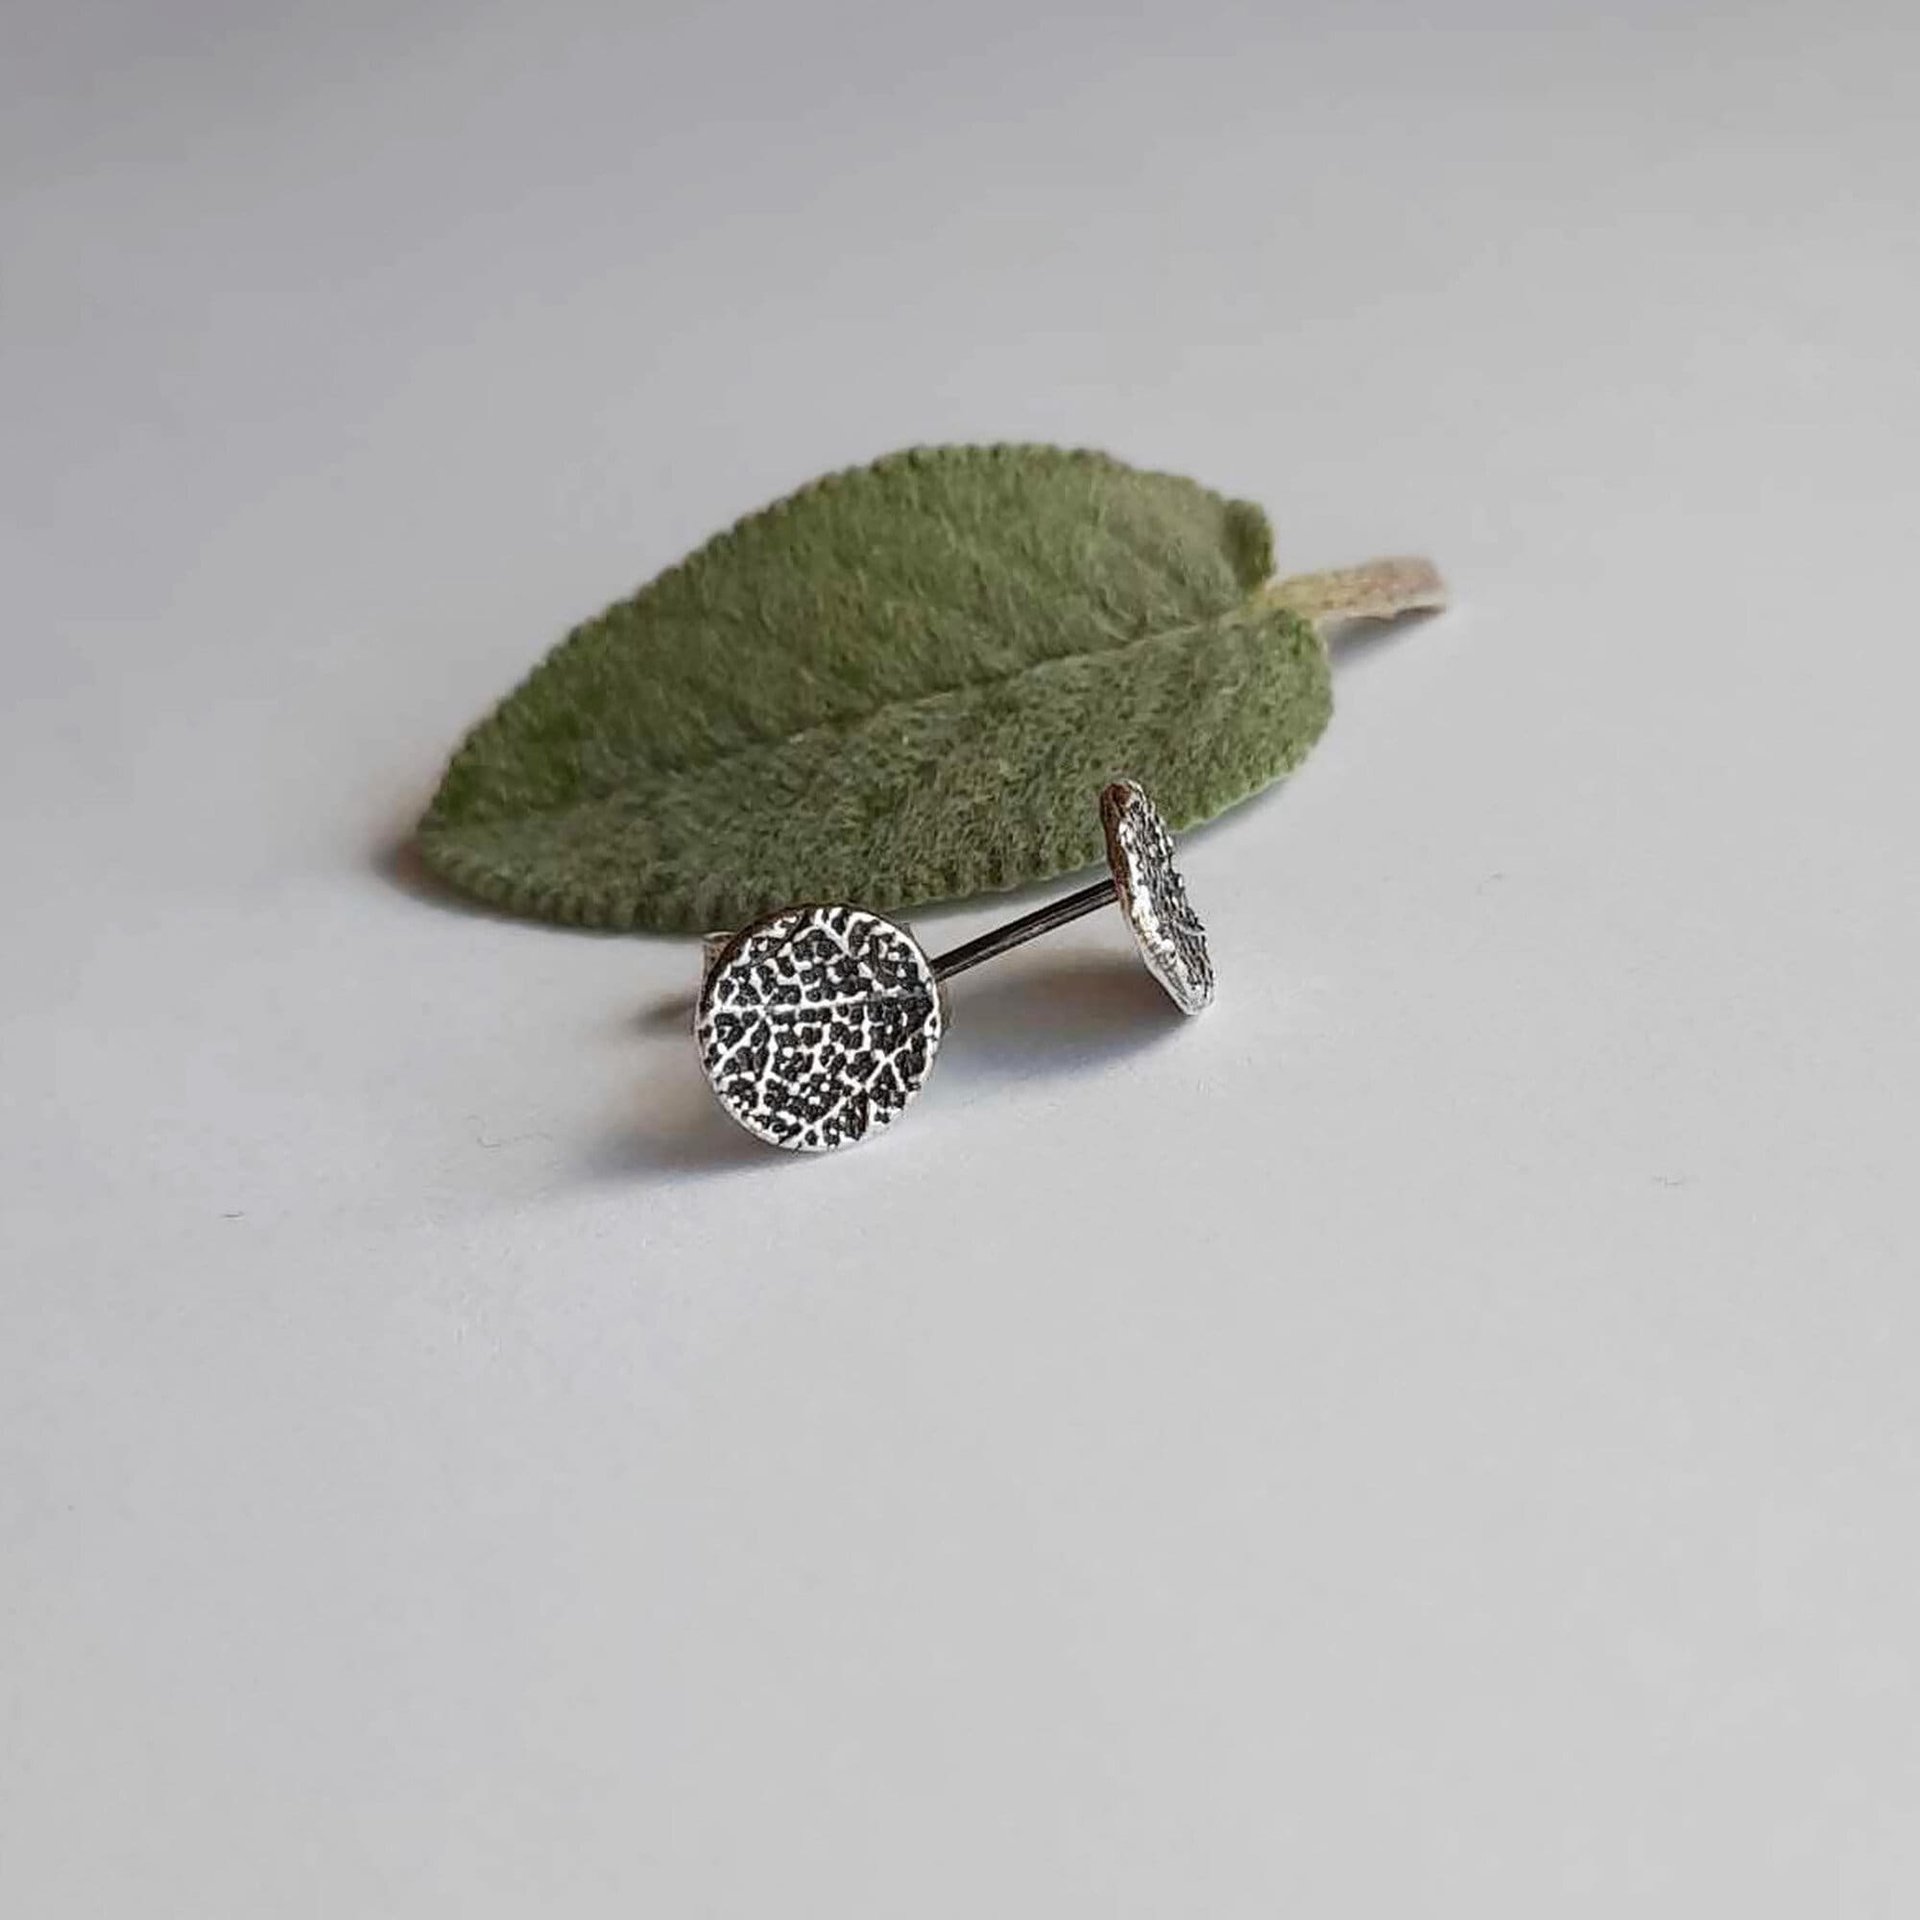 Oxidized Pure Silver Sage Leaf Round Stud Earrings ~ Handmade by The Tiny Tree Frog Jewellery